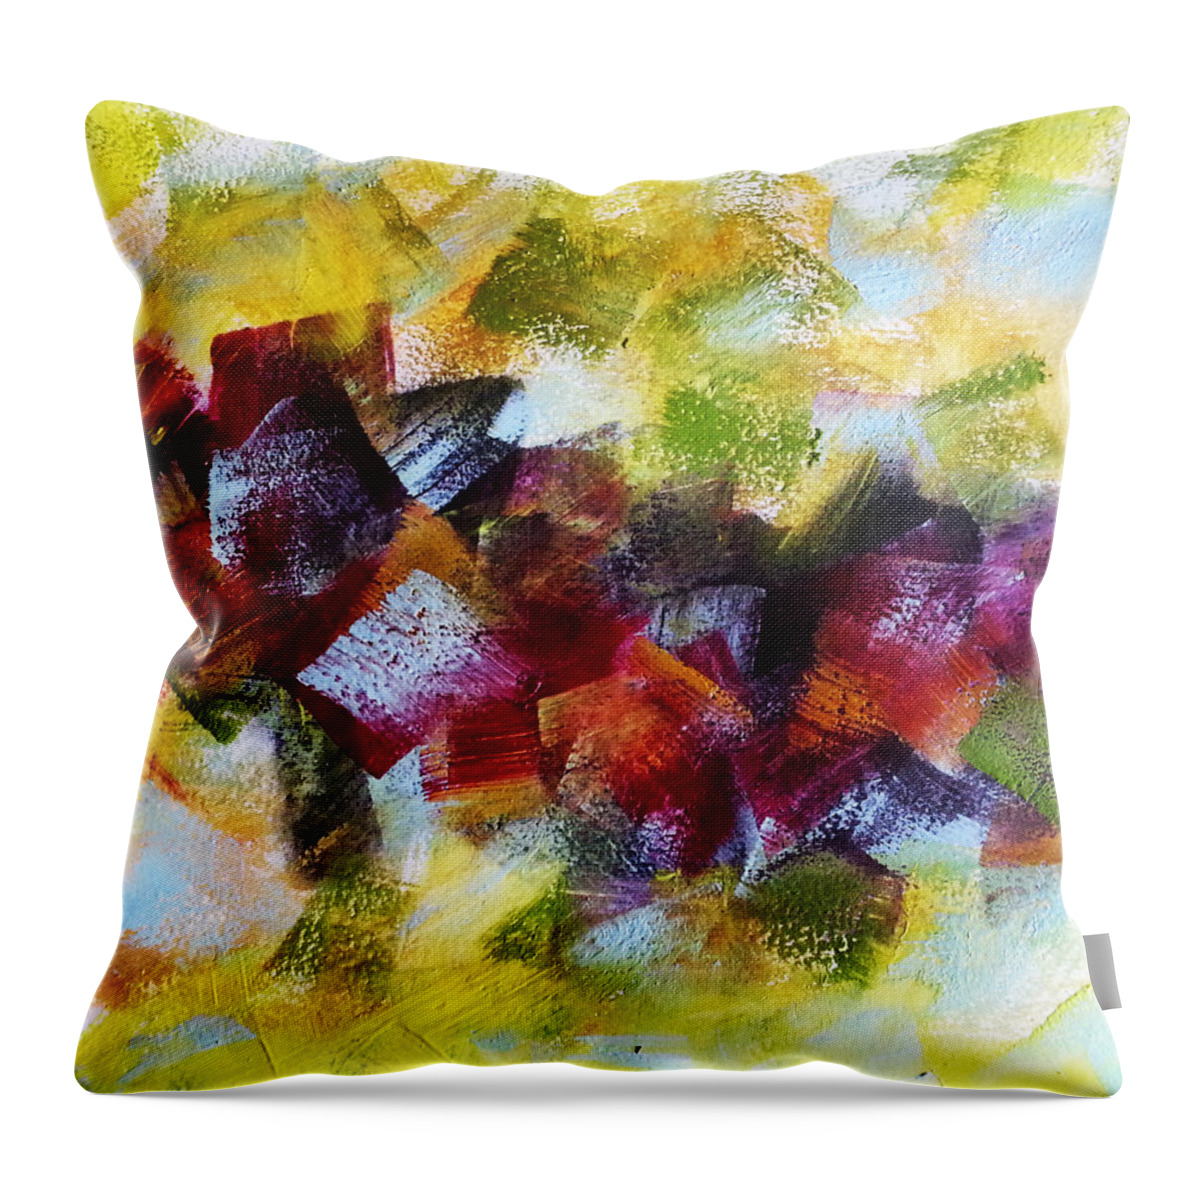 Abstract Throw Pillow featuring the painting Autumn Falling by Florentina Maria Popescu